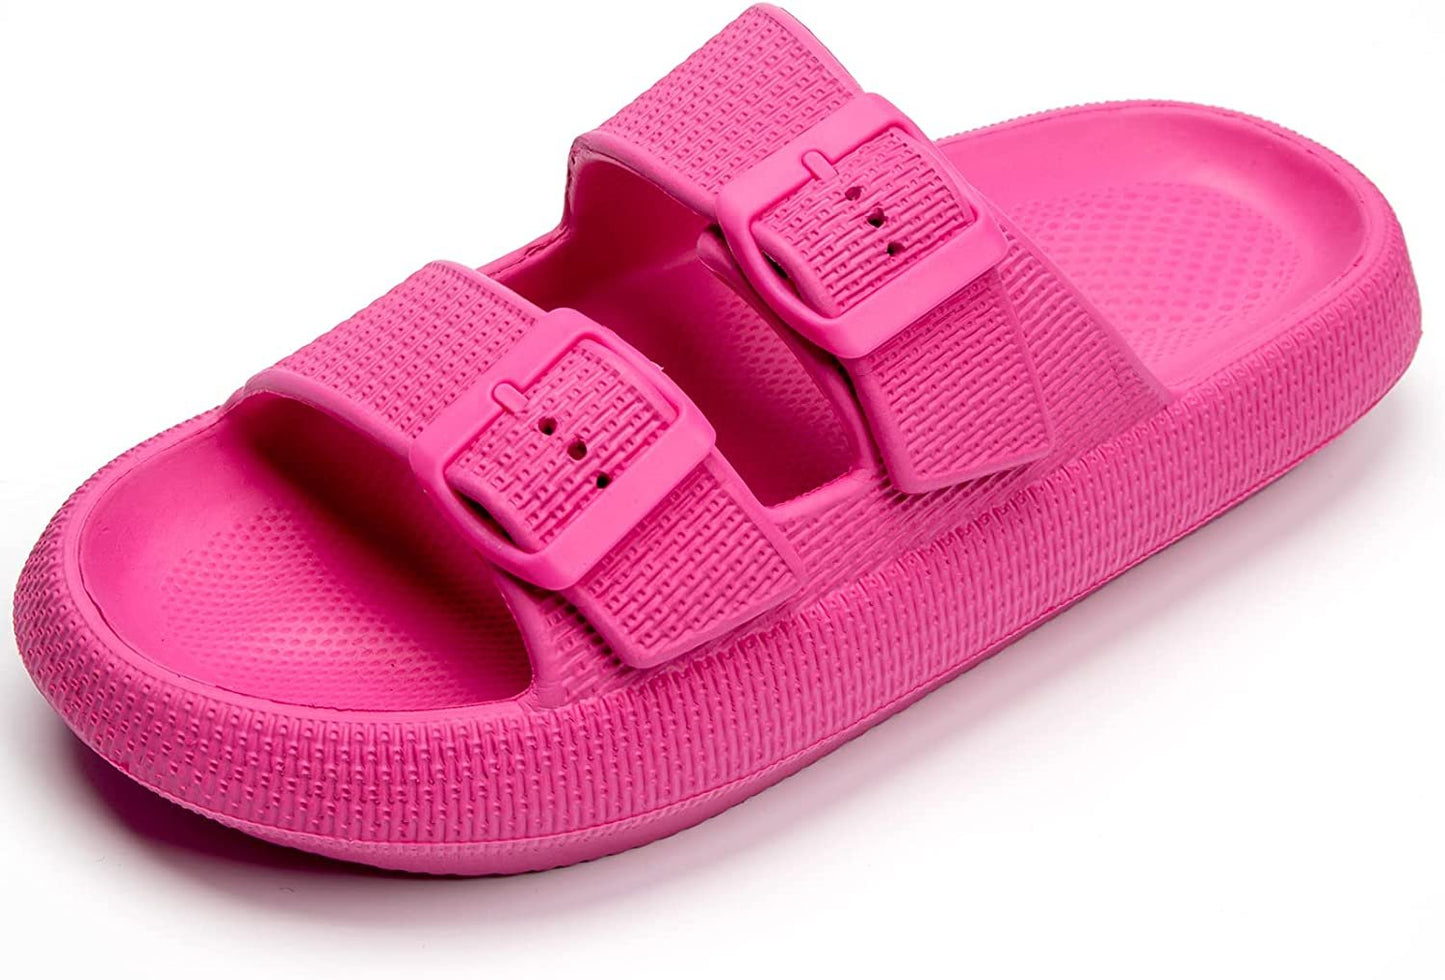 Womens Slip-on Sandals – Casual, Cute & Comfortable Slippers for Summer – Use Indoor or Outdoor adjustable buckle straps